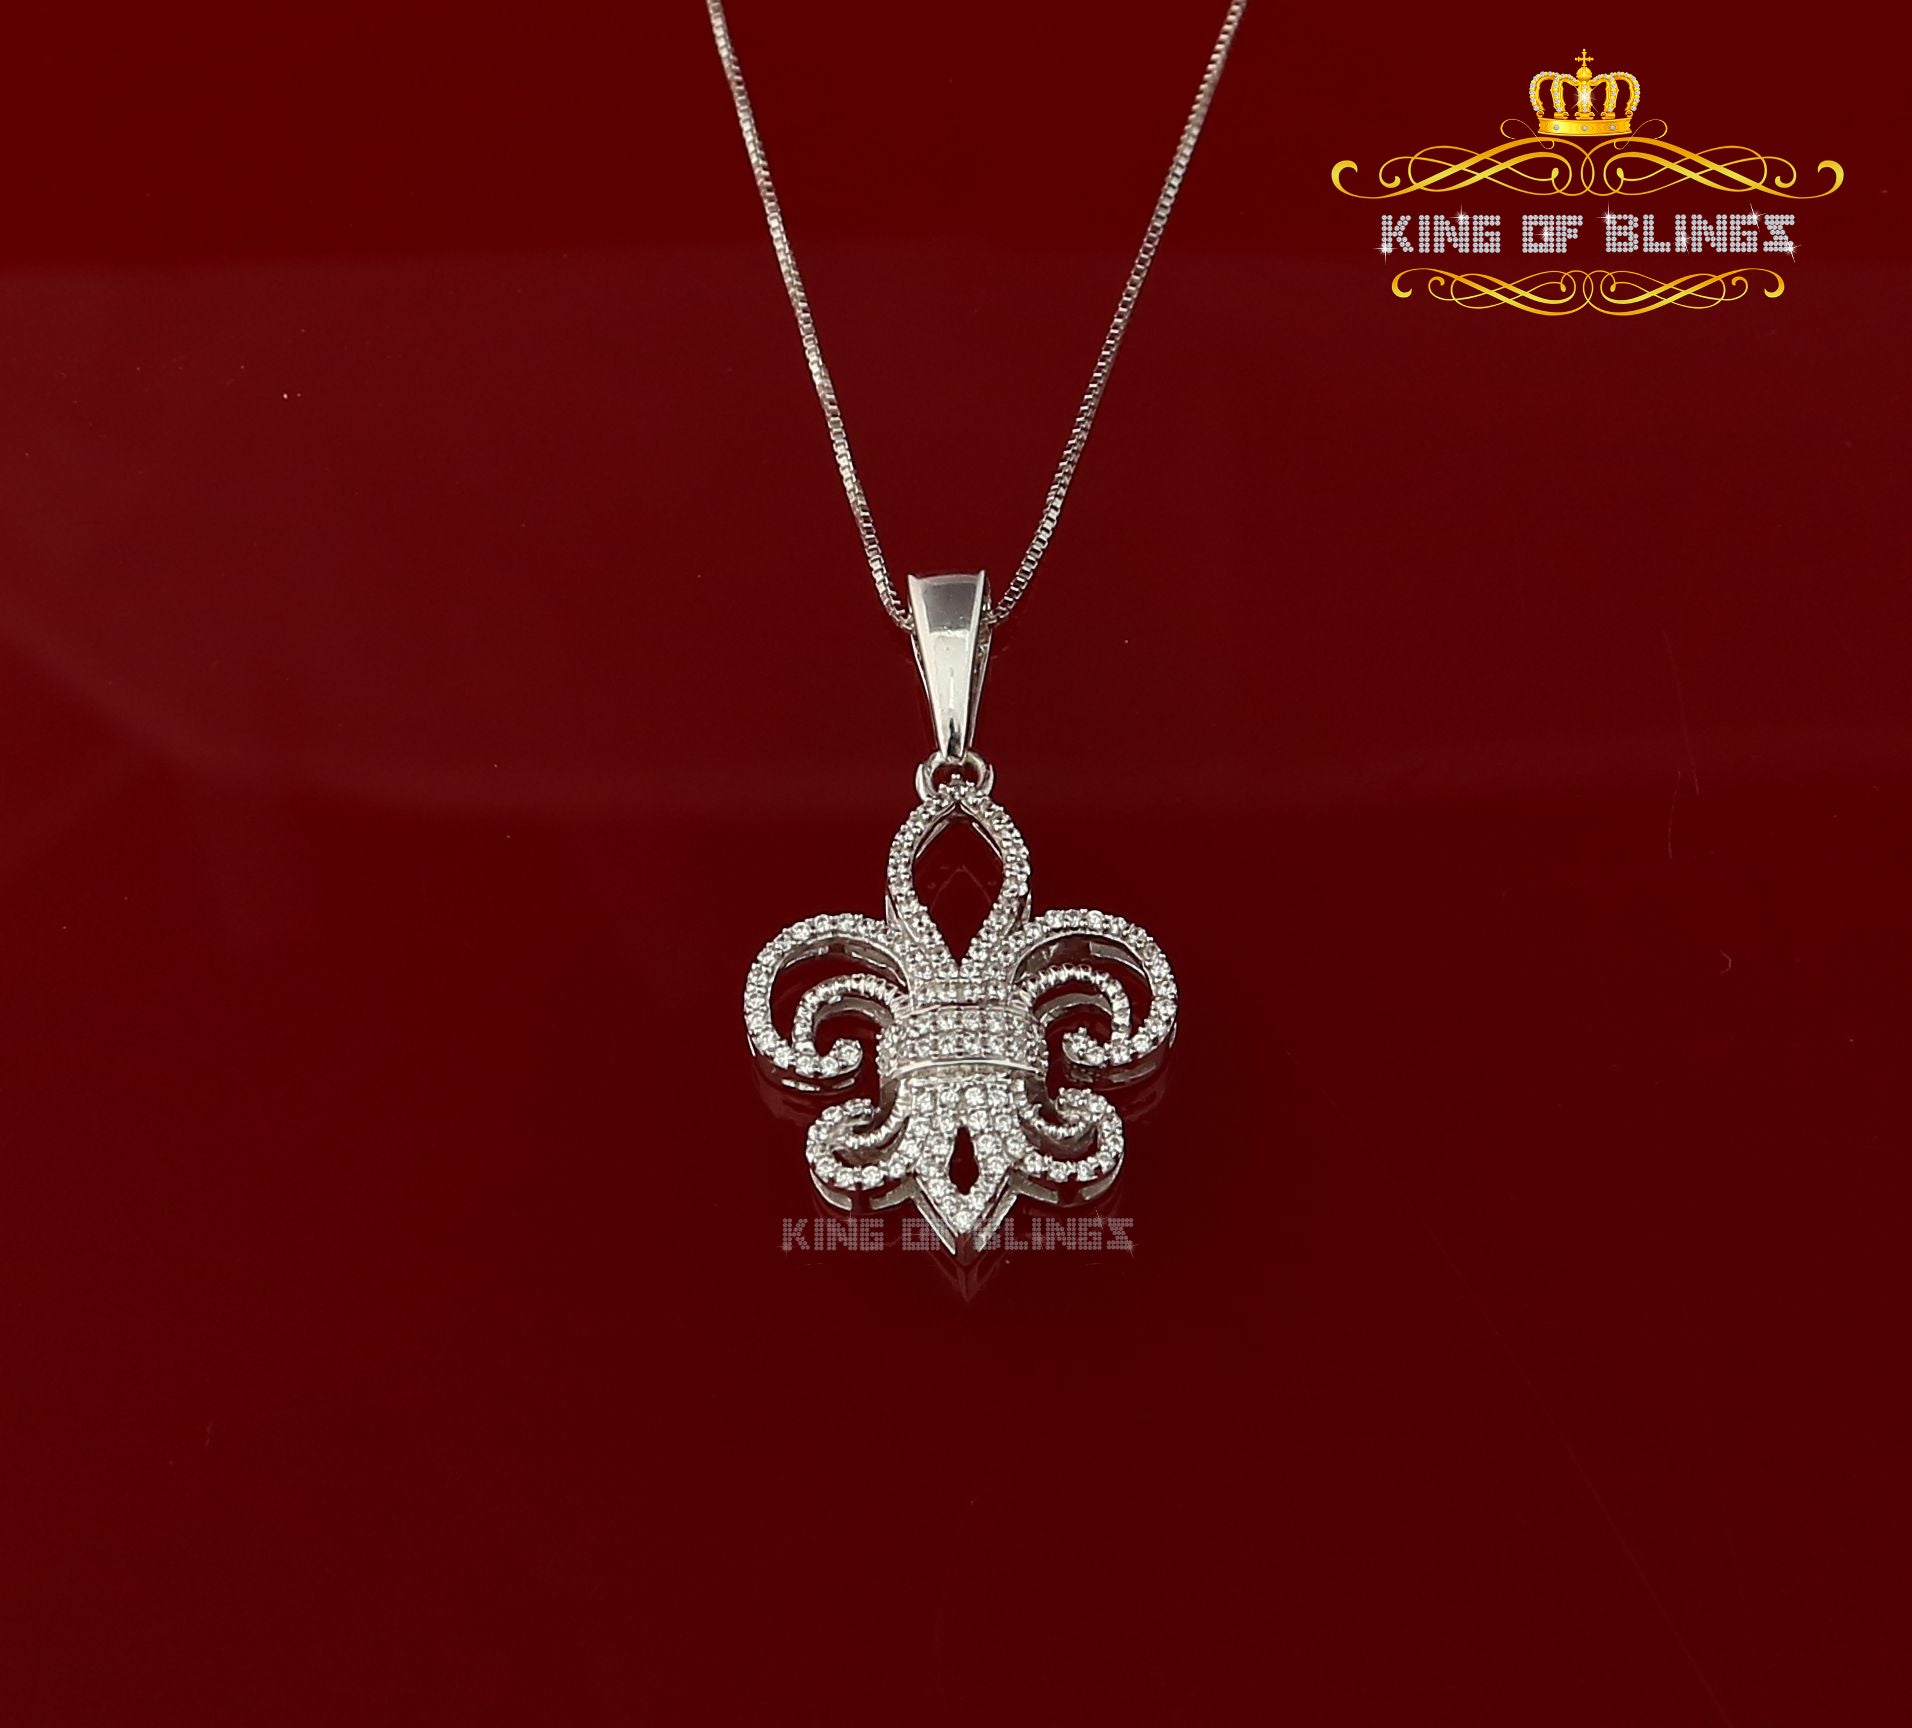 Sterling 925 Silver Fleur de Lis White Shape Pendant with 0.93ct Cubic Zirconia KING OF BLINGS